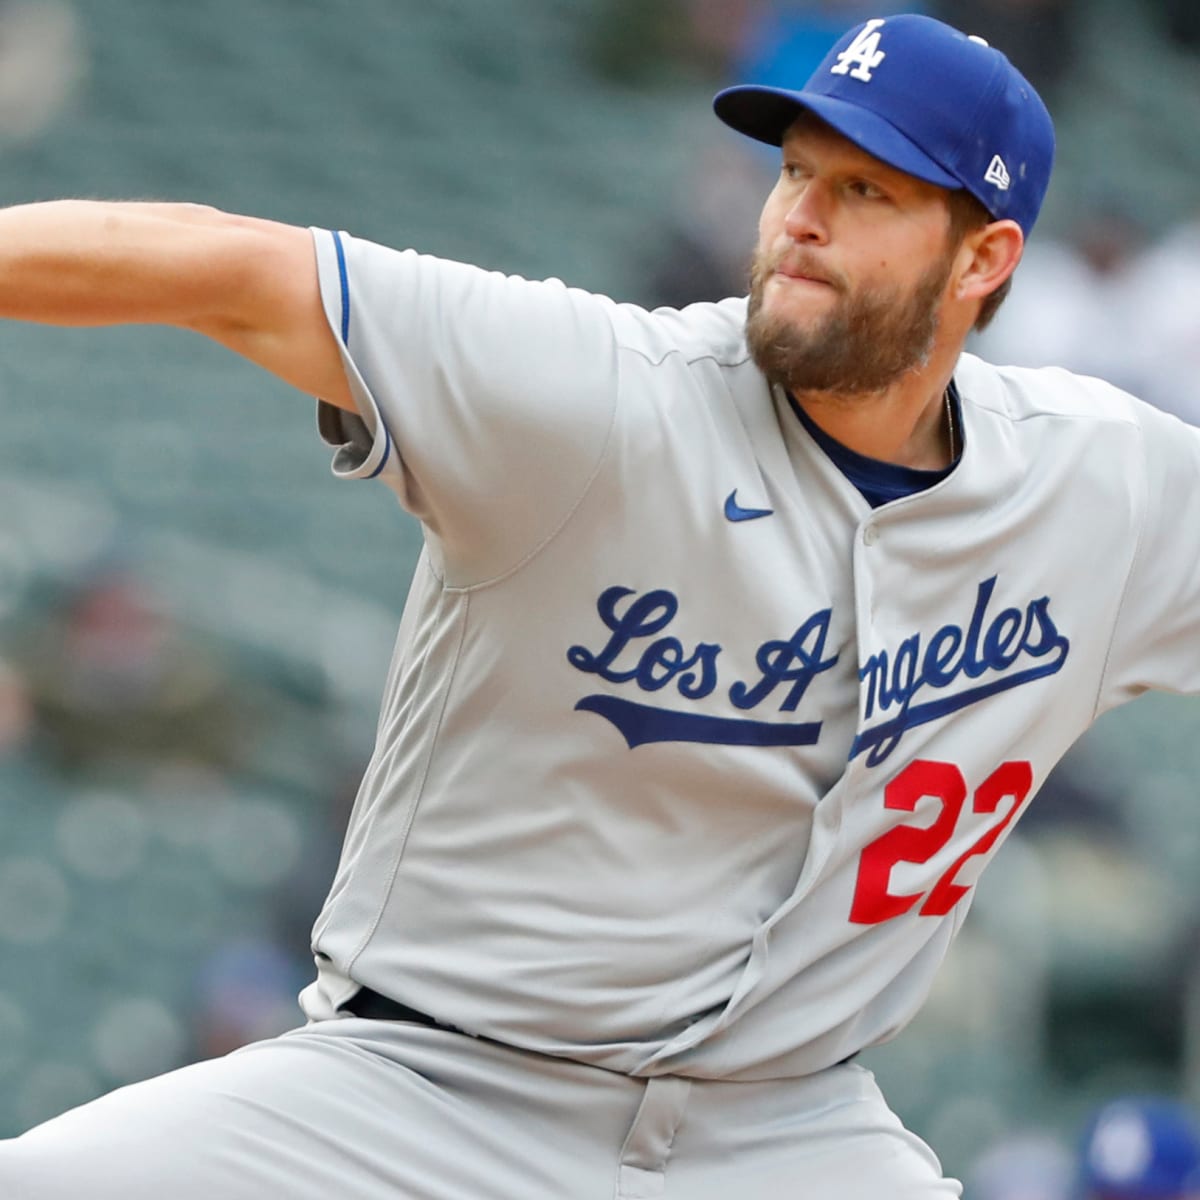 Los Angeles Dodgers starting pitcher Clayton Kershaw (22) reacts